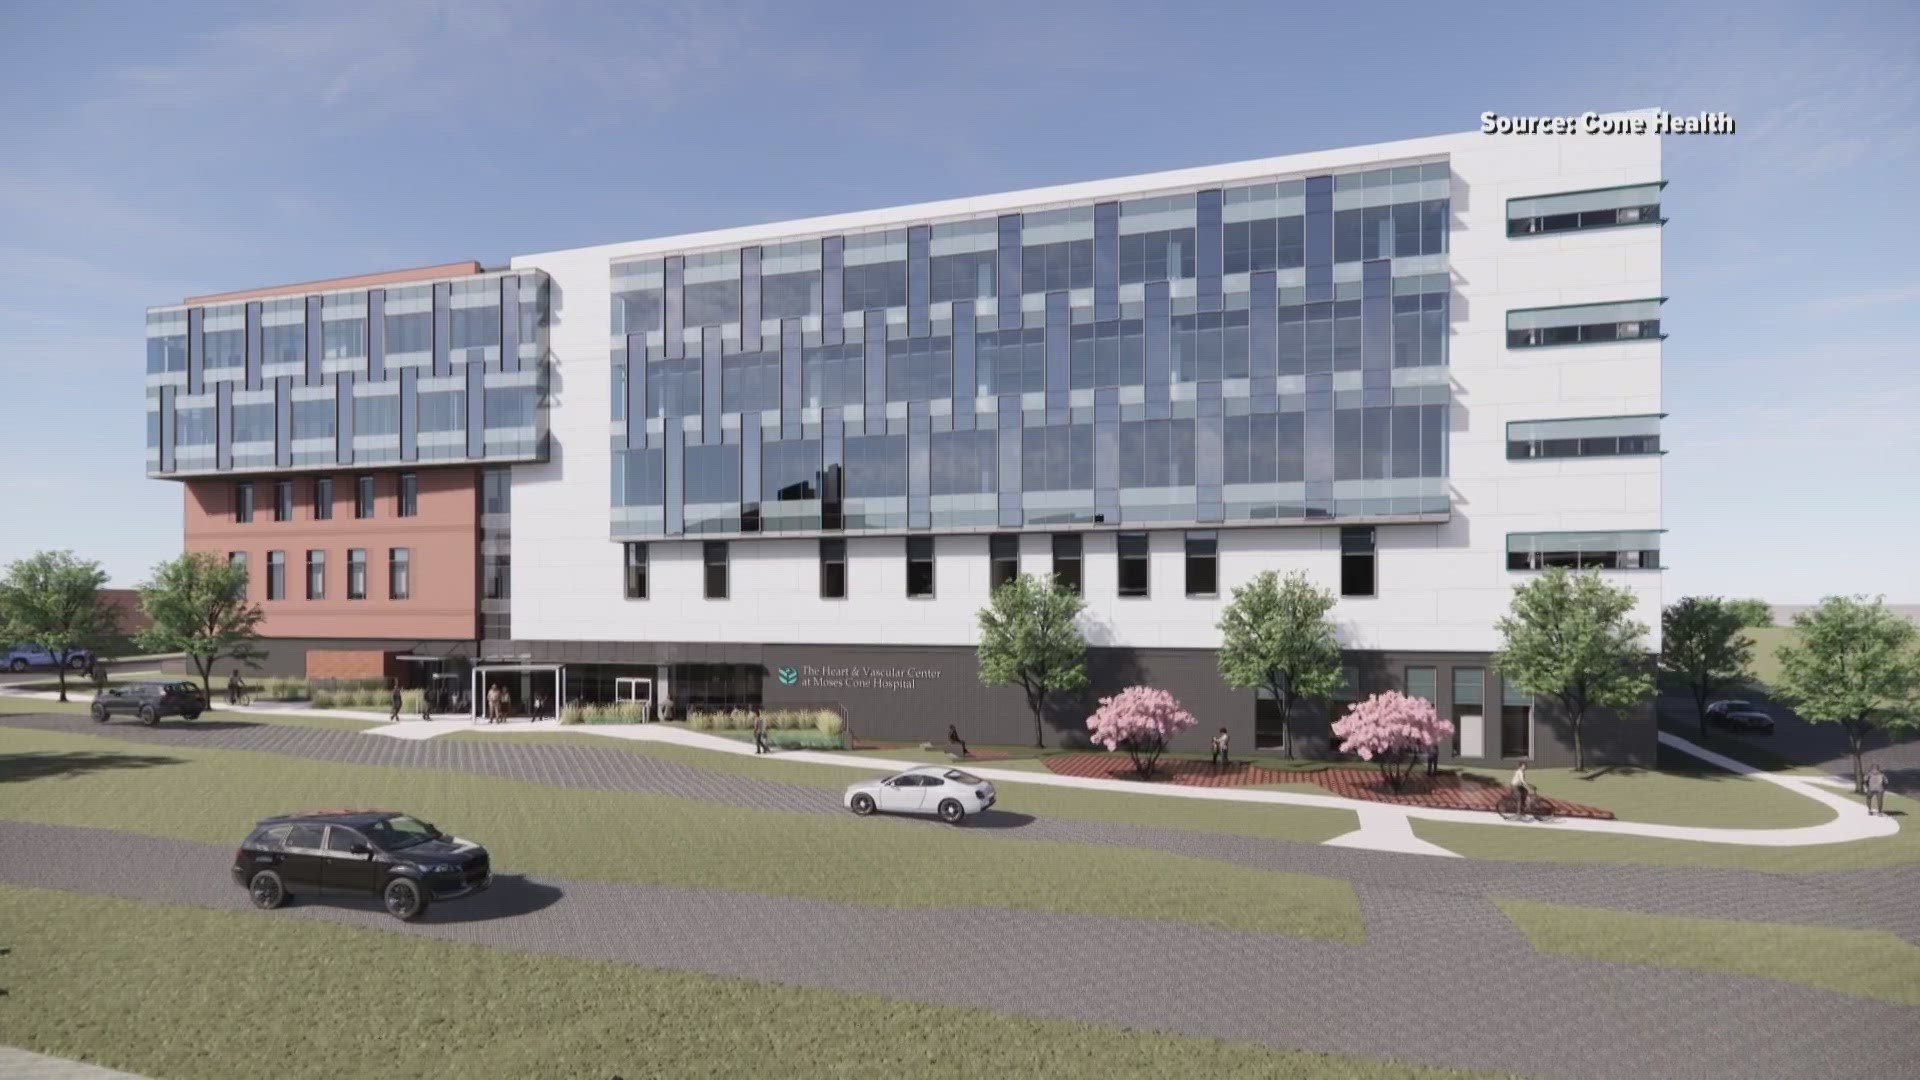 Hospital leaders plan to use this center for outpatient procedures and plan to serve thousands of additional heart patients expected over the coming decade.